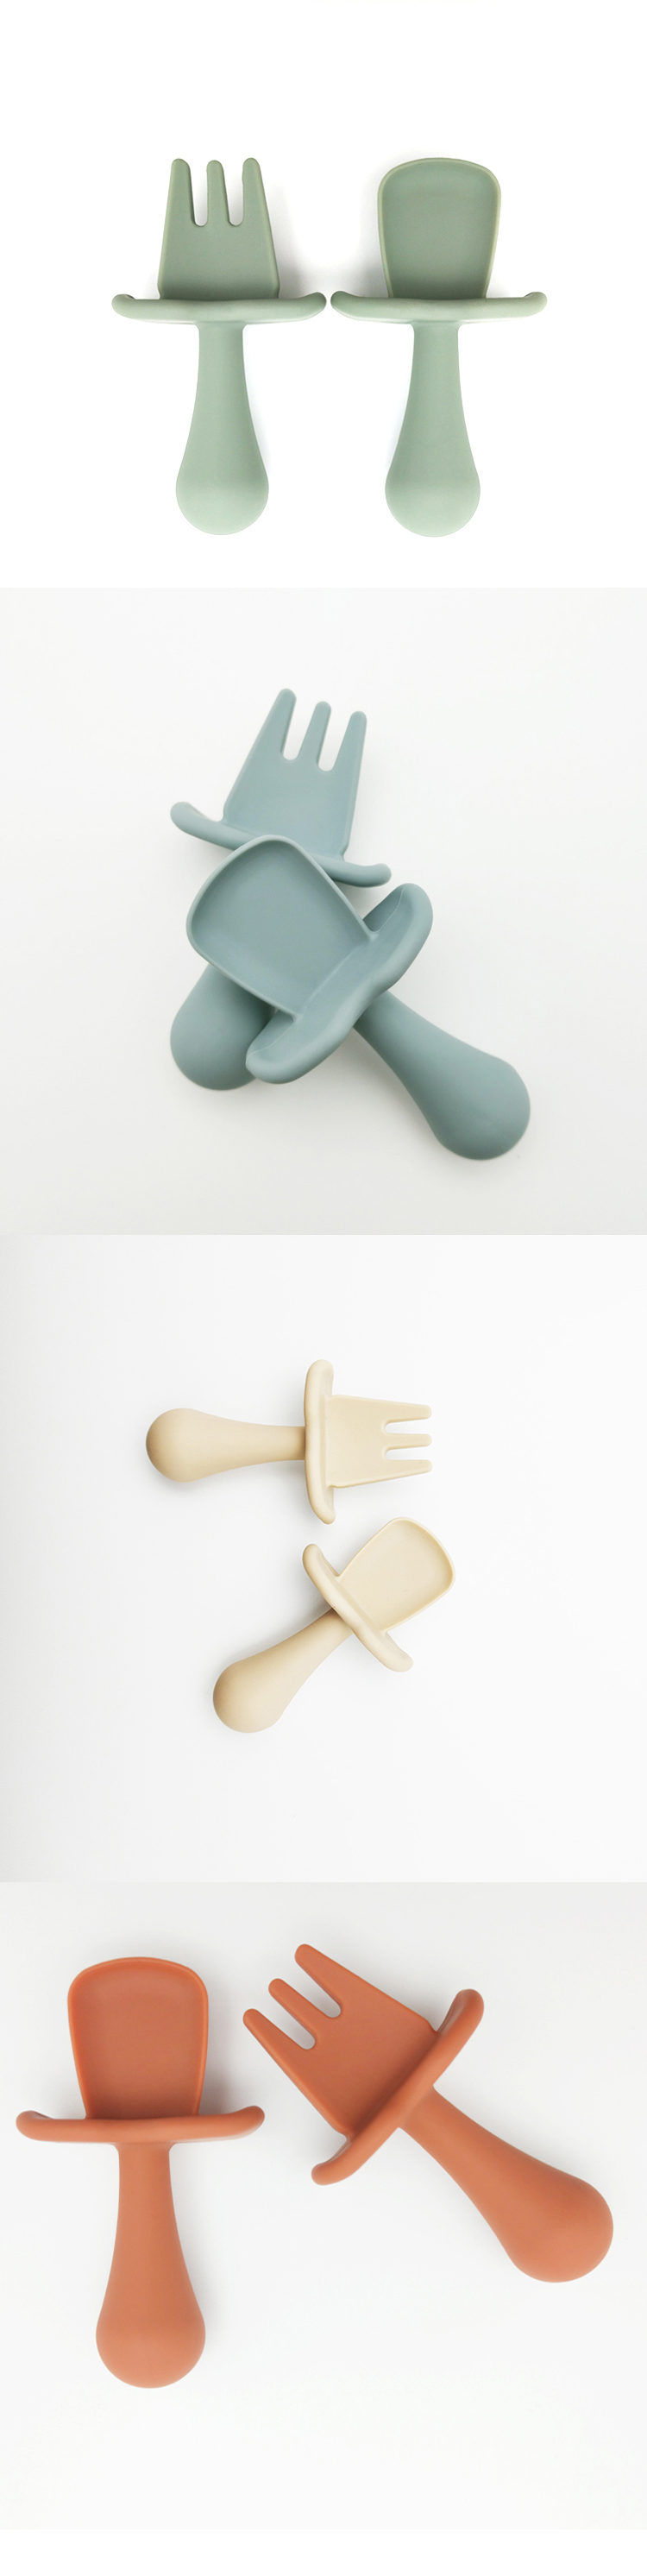 [3 sets]Anti suffocation baby spoon fork tableware set